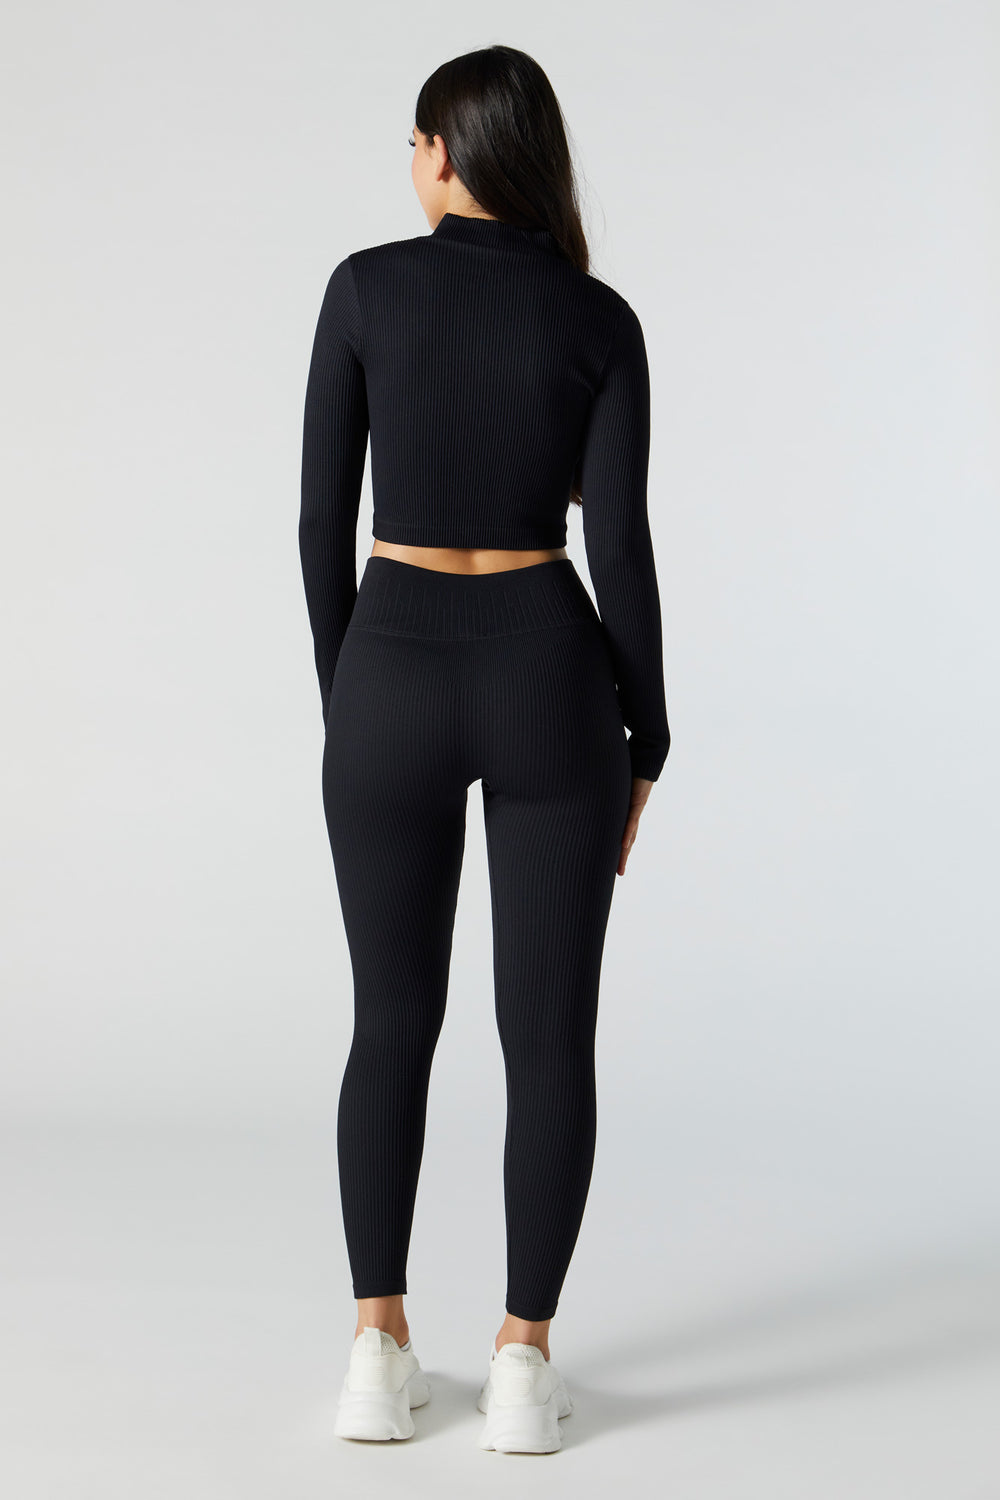 Sommer Ray Active Seamless Ribbed Legging Sommer Ray Active Seamless Ribbed Legging 7